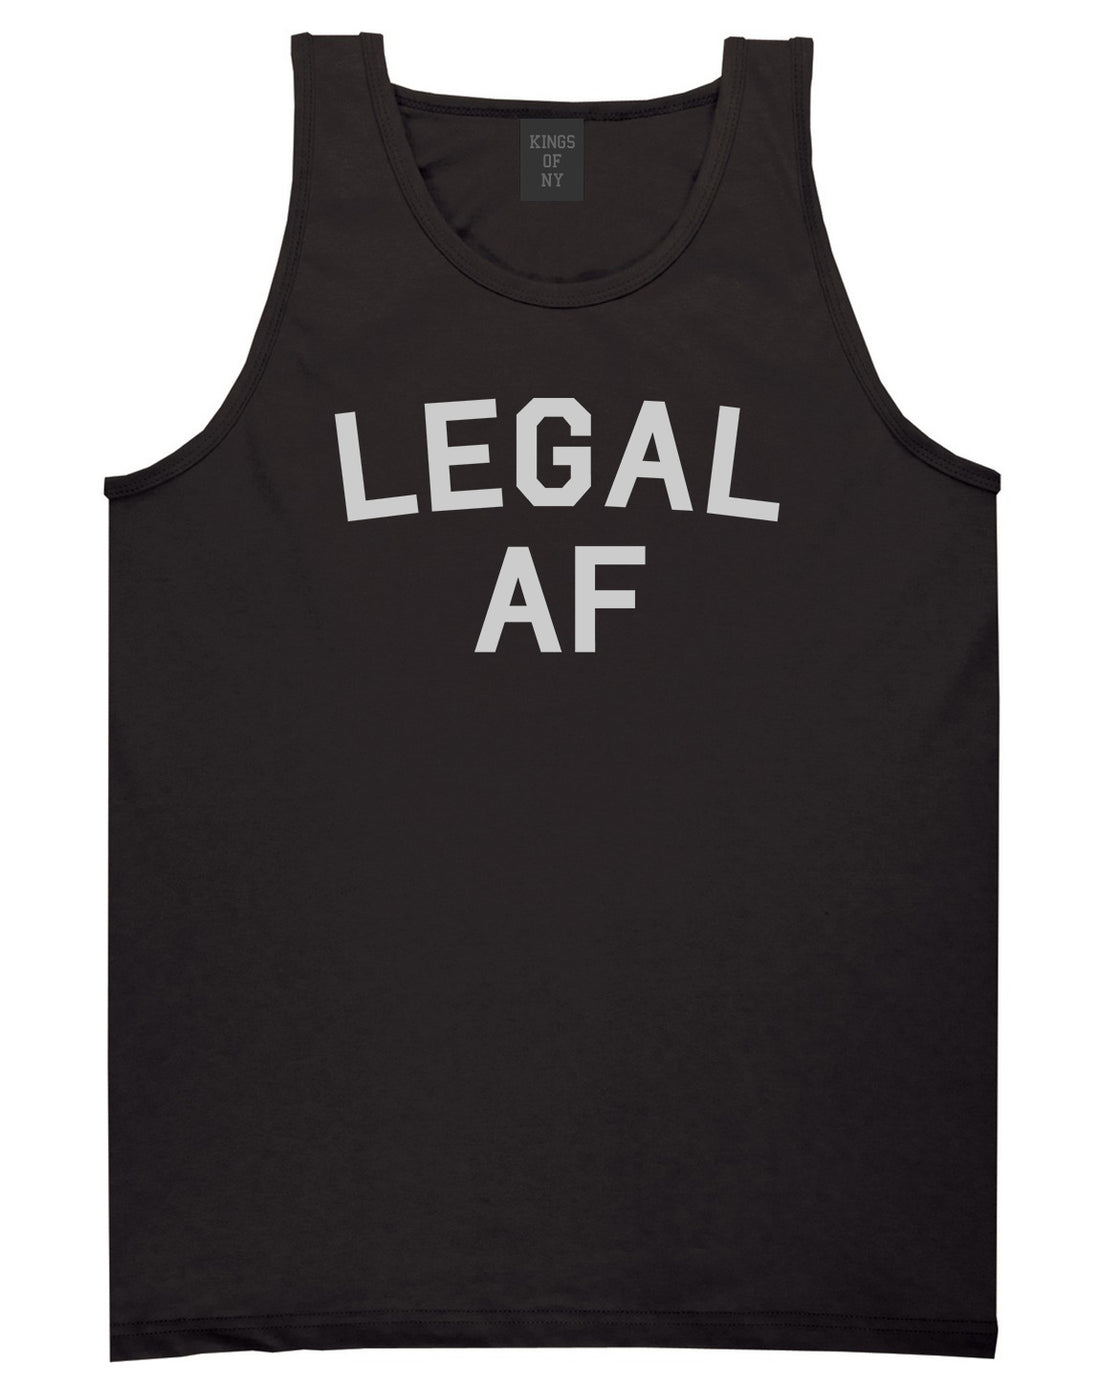 Legal AF 21st Birthday Mens Tank Top Shirt Black by Kings Of NY